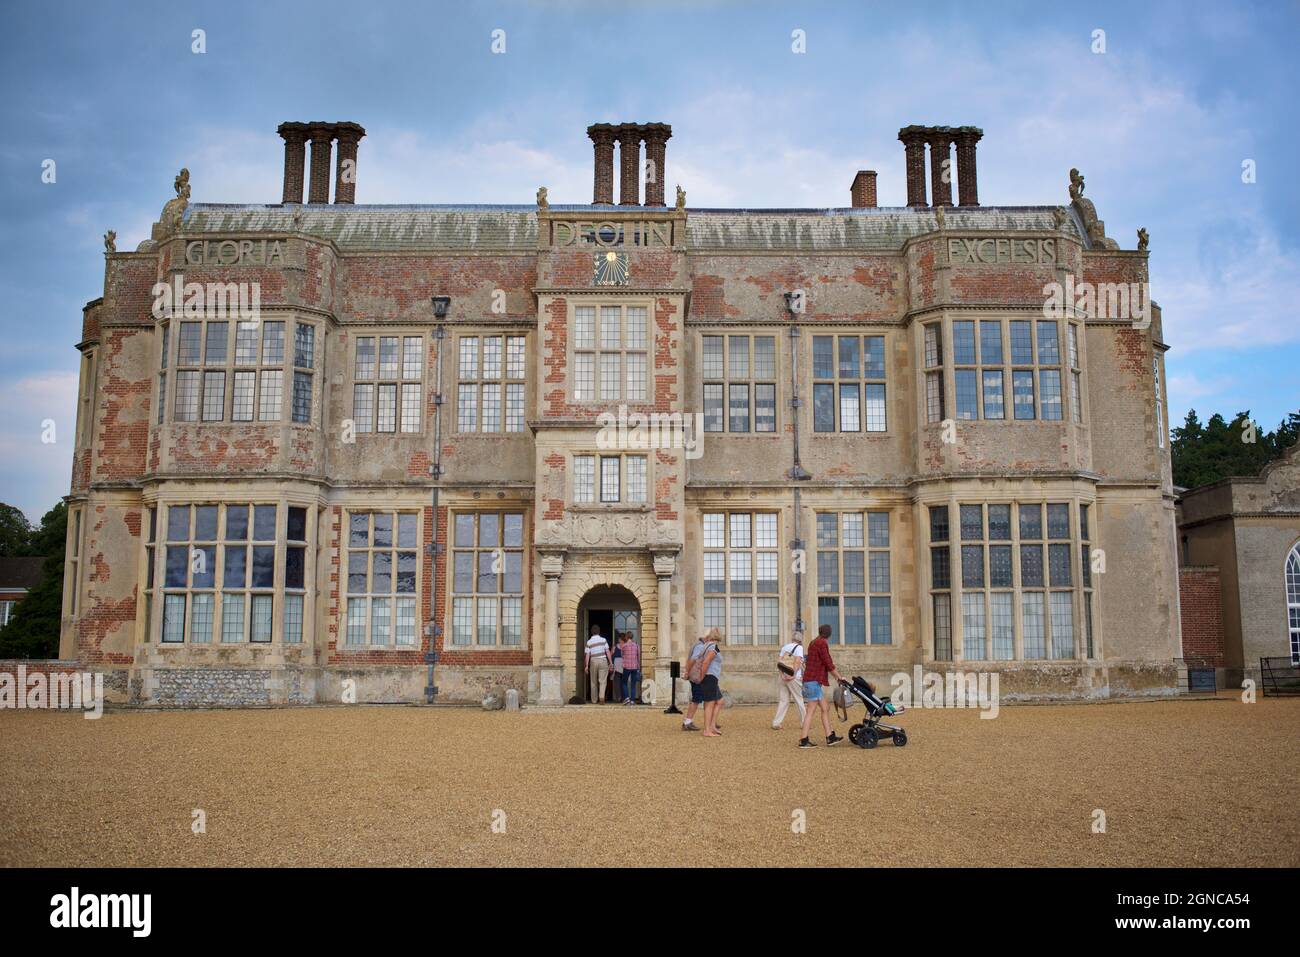 Felbrigg Hall, Norfolk. Felbrigg Hall is a 17th-century English country house near Felbrigg, Norfolk.  The unaltered 17th-century house is noted for its Jacobean architecture and fine Georgian interior. Stock Photo